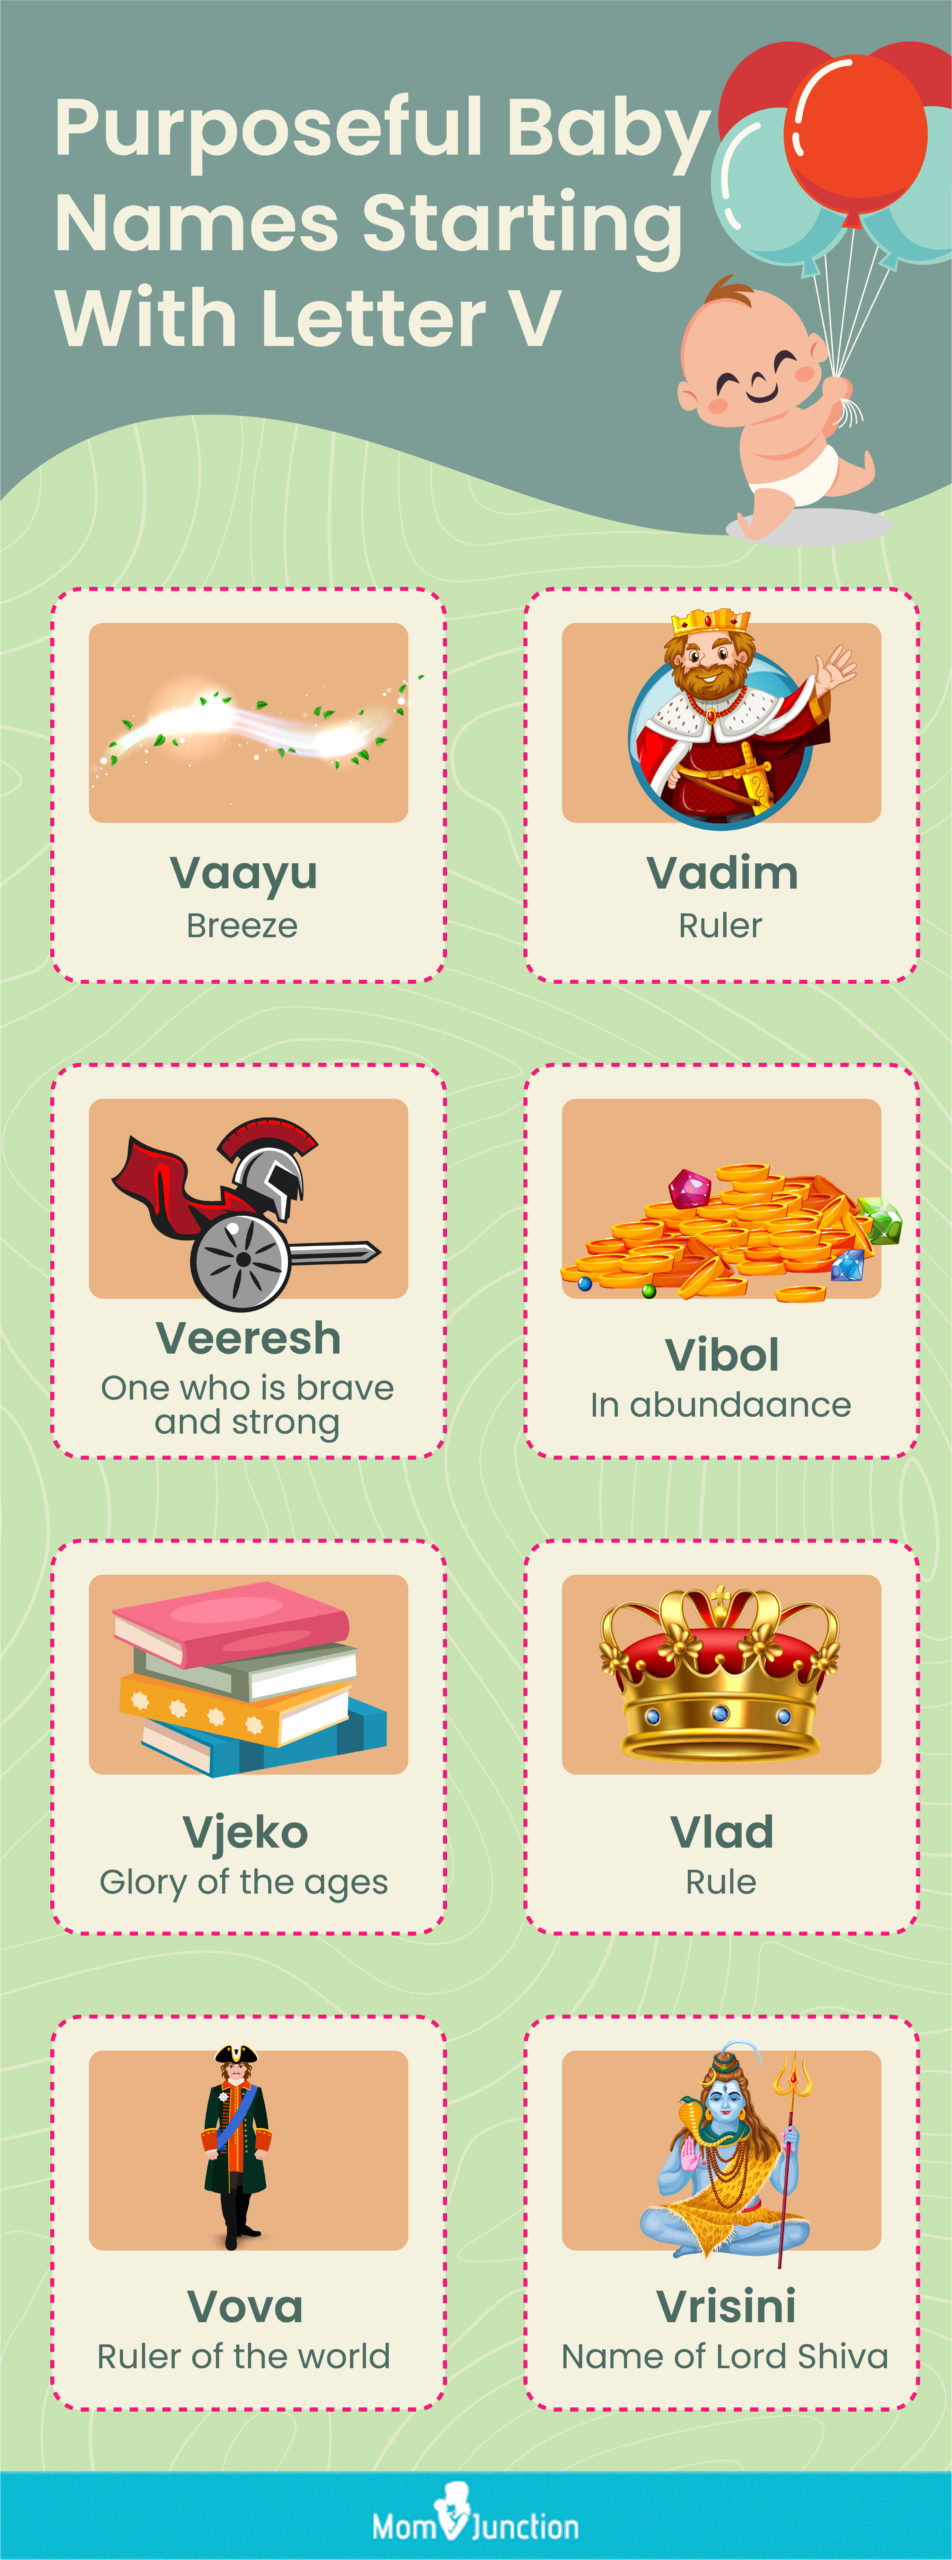 purposeful baby names starting with letter v (infographic)